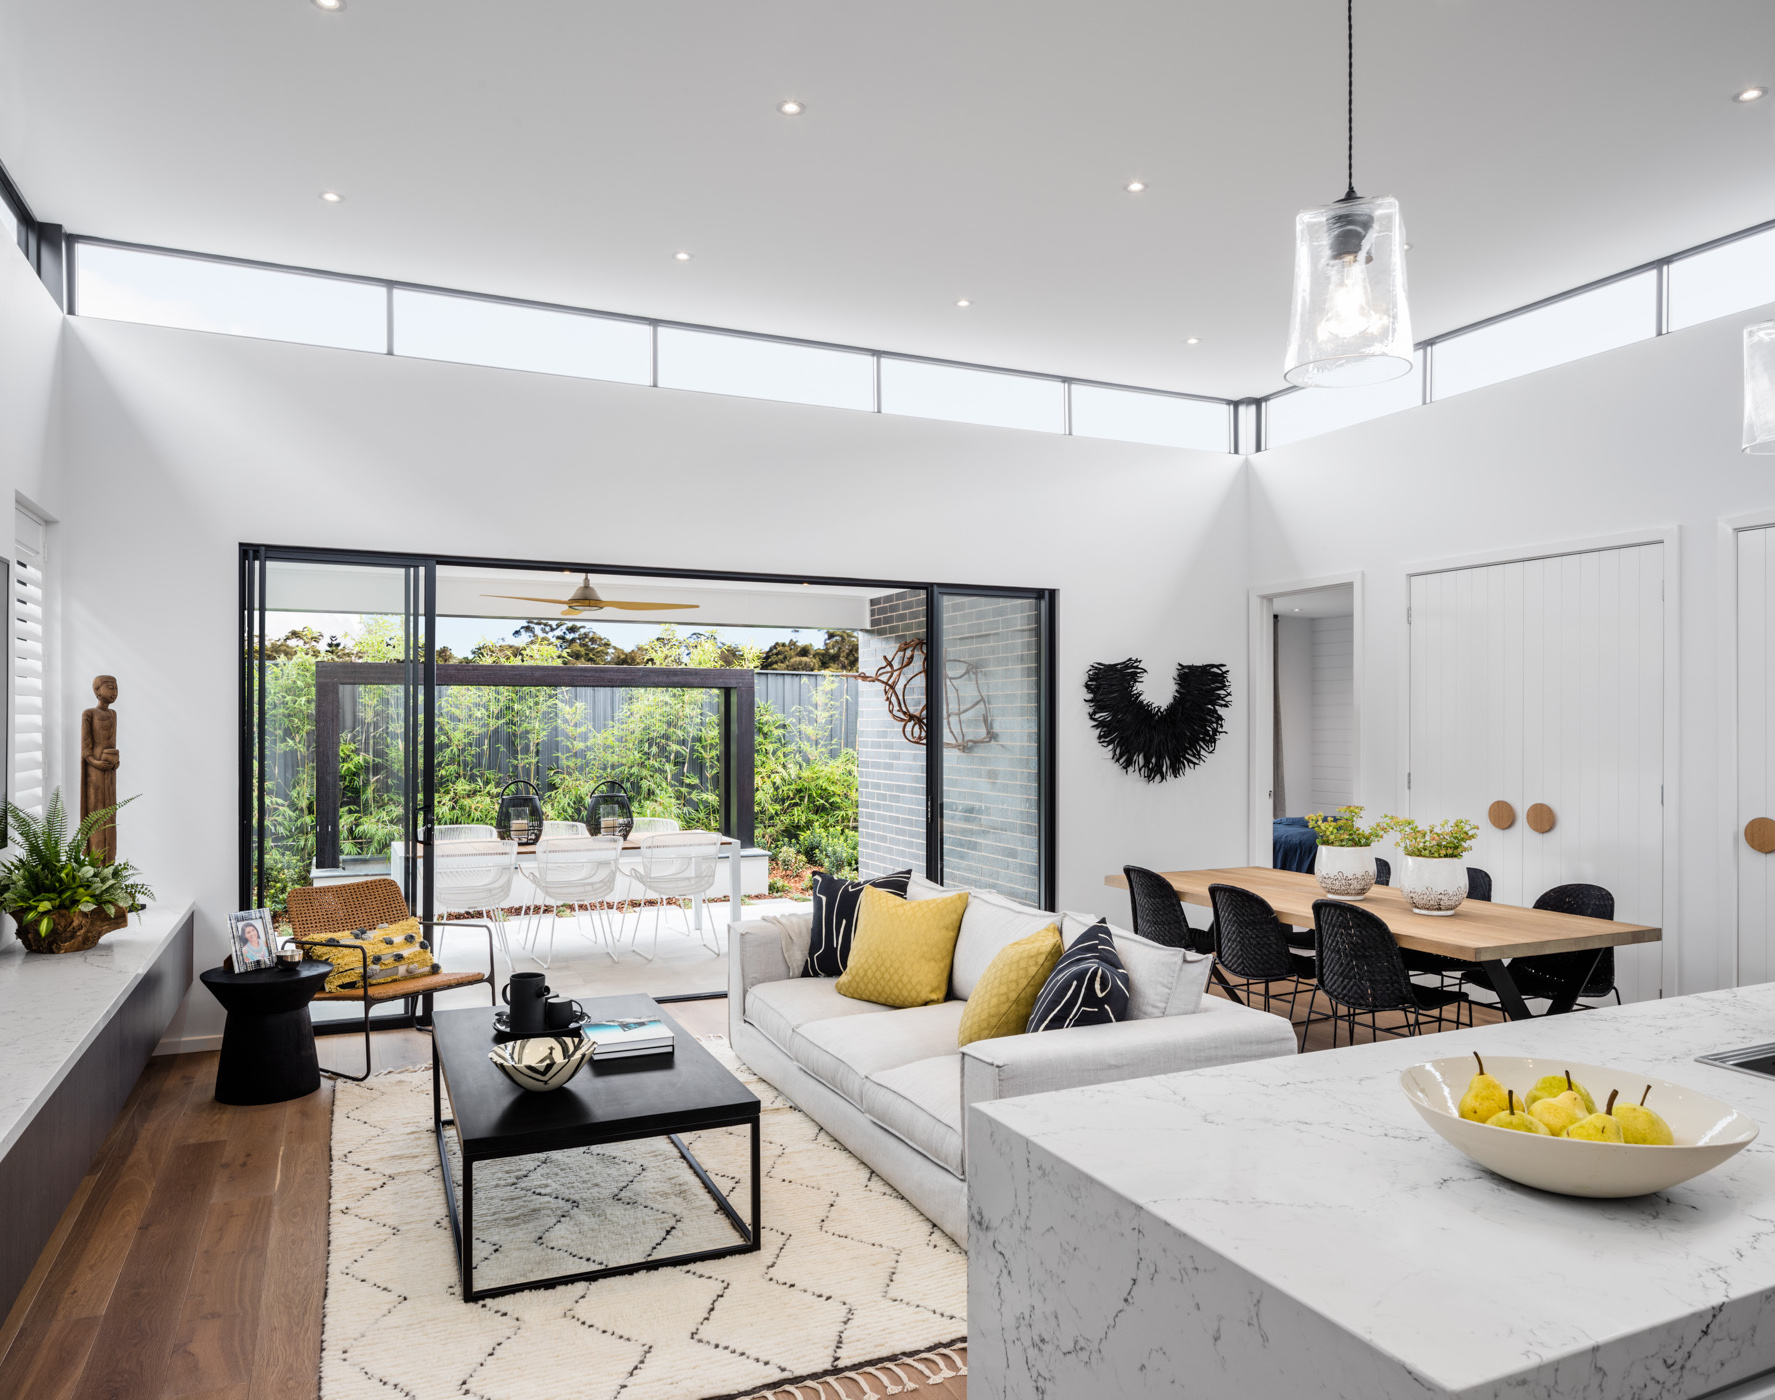 Design tips to maximise natural light in your home